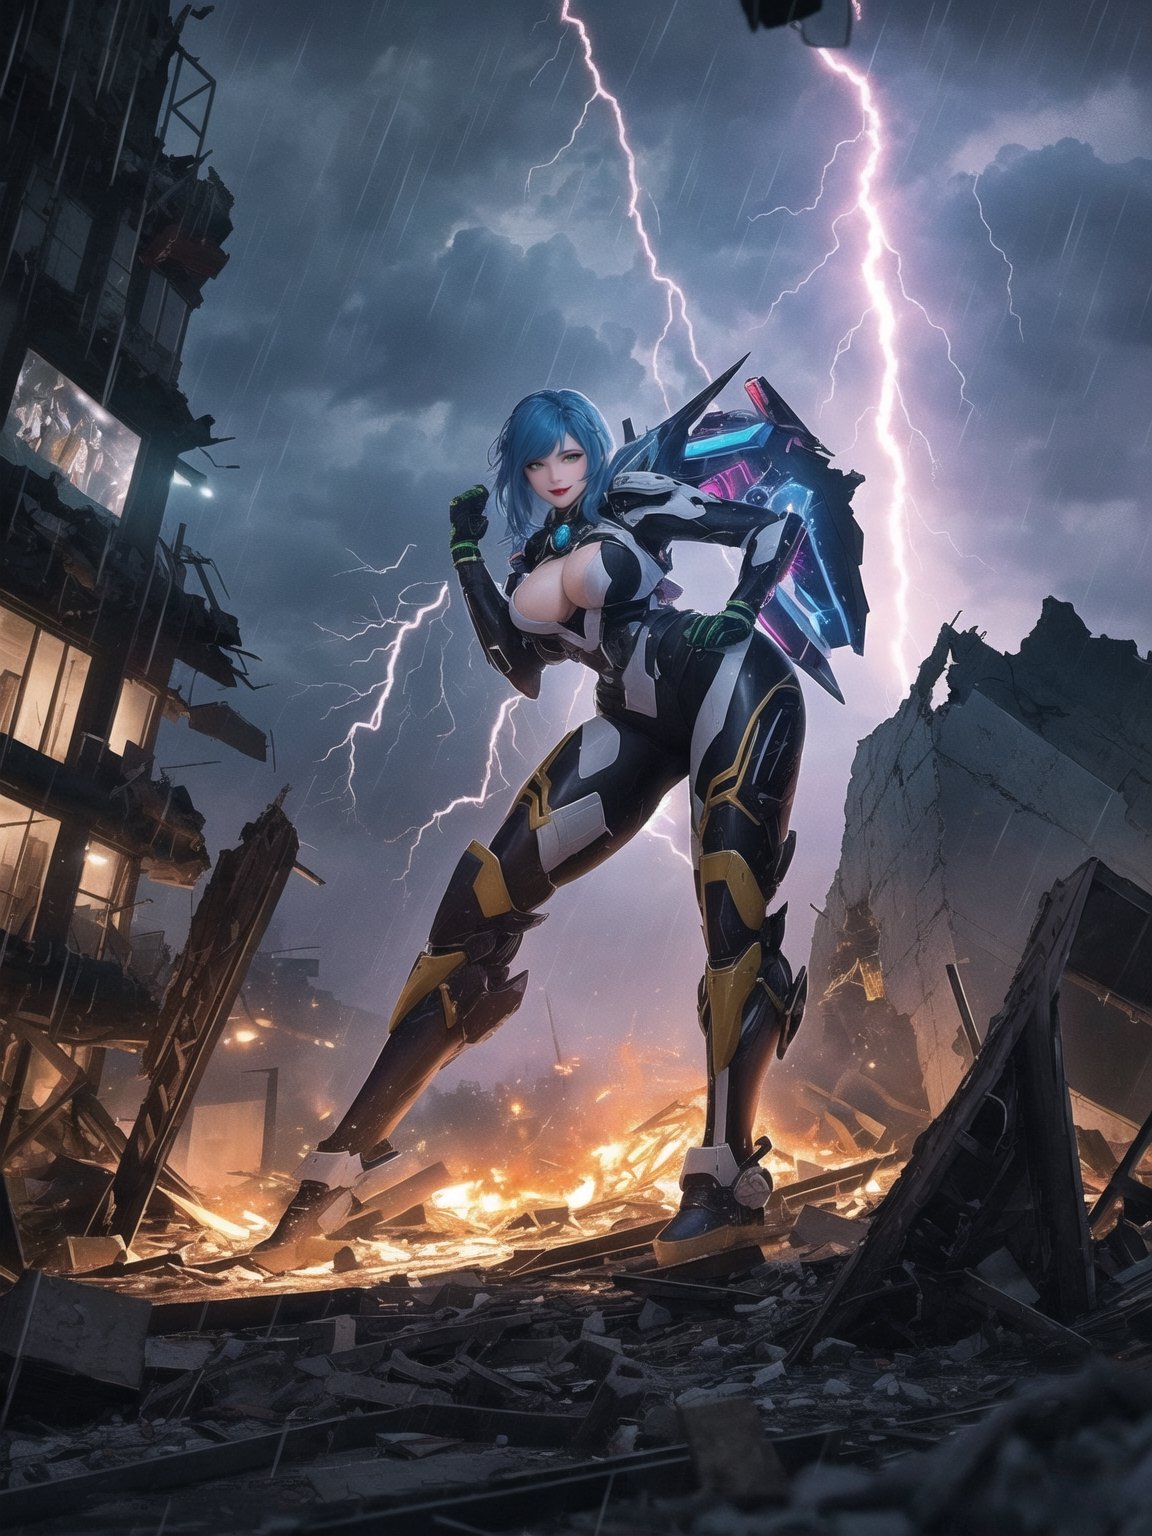 Impeccable 8K resolution, ultra-detailed. In a fusion style of mecha and CGI anime, with traits reminiscent of futuristic aesthetics. | Amidst the destruction of a city at night, under heavy rain, a 30-year-old woman, clad in a white mecha suit with blue details and golden neon lights, displays an intense expression of hatred and fury. Her voluminous bust and spiky blue hair, with a fringe covering part of her right eye, add a distinctive touch to her presence. She stares directly at the viewer, emanating a blue magical aura with pulsating thunder around her. | The composition highlights the character in the foreground, while massive debris from destroyed buildings and wreckage of machines fill the scene. The dynamic angle emphasizes the strength and determination of the woman amidst the chaos. | Effects like dramatic lighting, intense rain, and thunder flashes create an electrifying atmosphere. The intensity of the magical aura adds a supernatural touch to the scene, heightening the character's sense of power. | A commanding woman in a white mecha suit, expressing anger and determination amid the destruction of a city at night under heavy rain. She ((interacting and leaning on anything, very large structure+object, leaning against, sensual pose):1.2), ((Full body image)), better_hands, More Detail